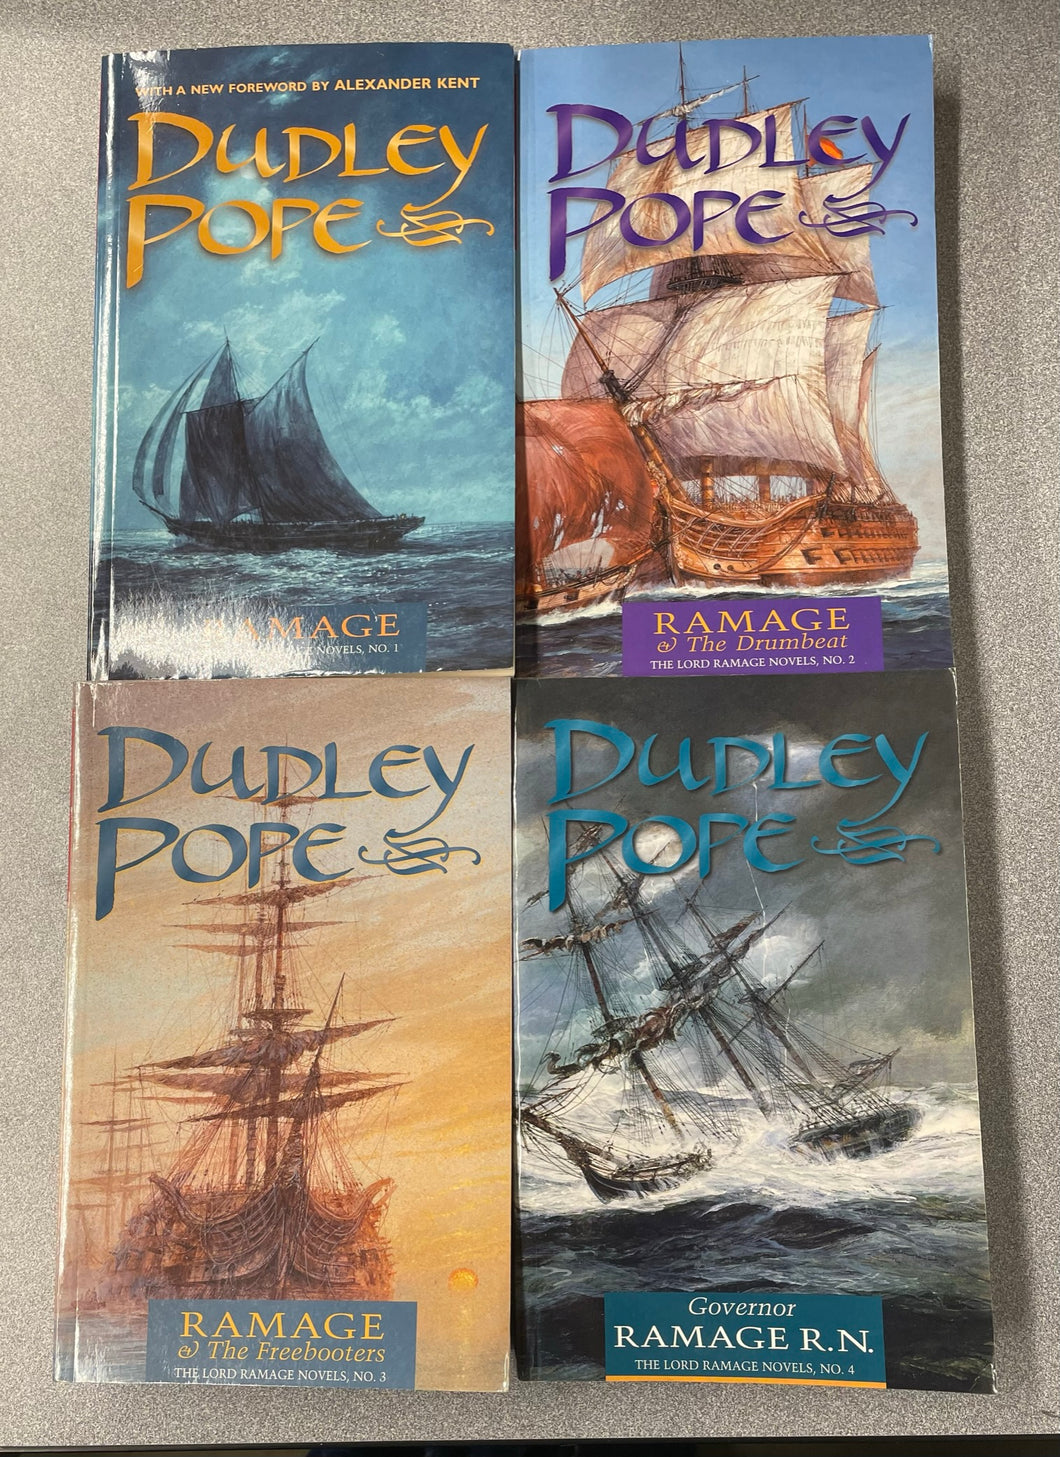 Pope, Dudley, Ramage's Prize: The Lord Ramage Novels, No. 5 [2000] AF 3/23